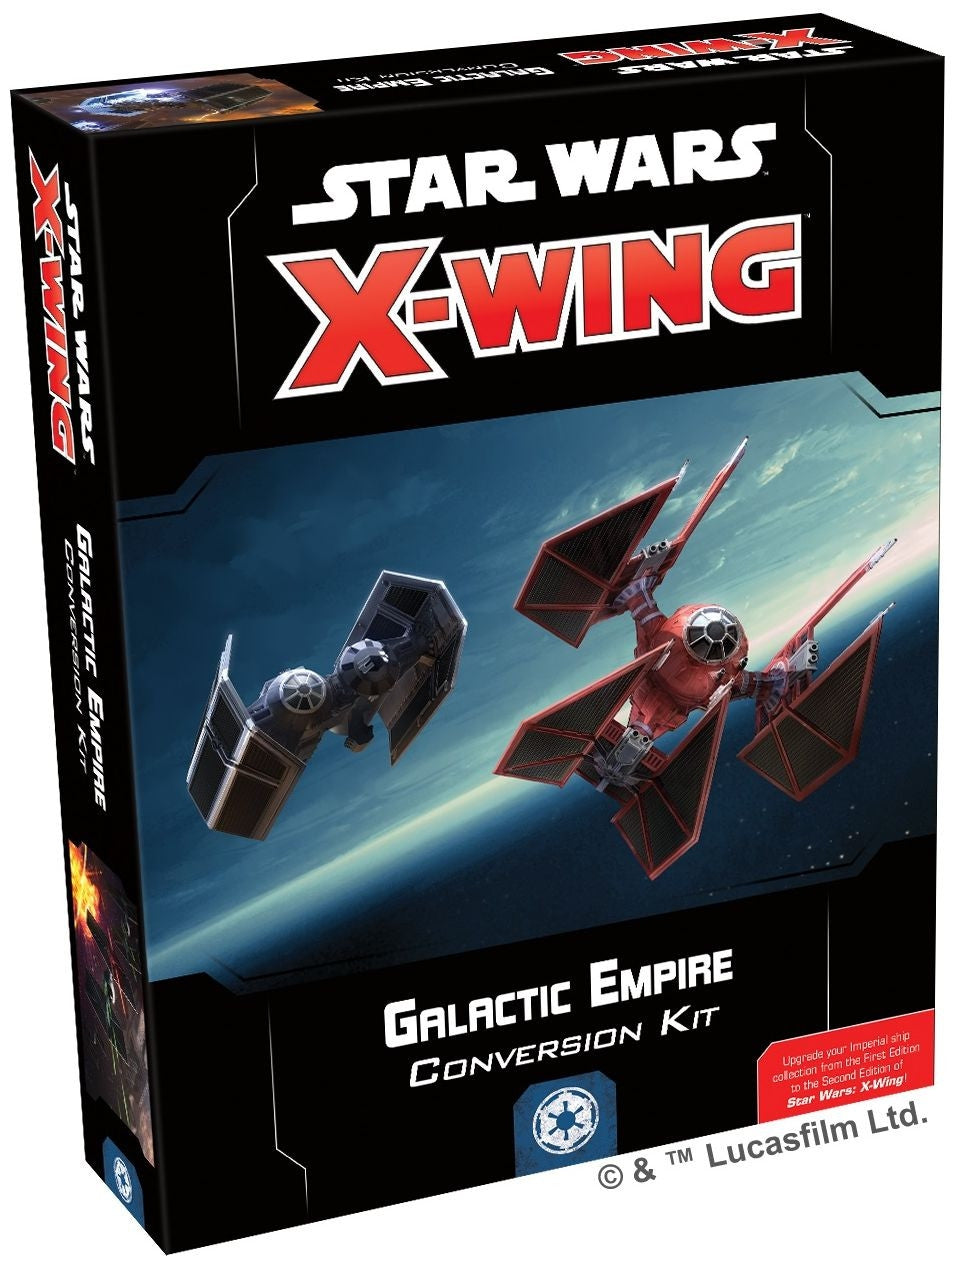 Galactic Empire Conversion Kit 2nd Edition - Star Wars X-Wing